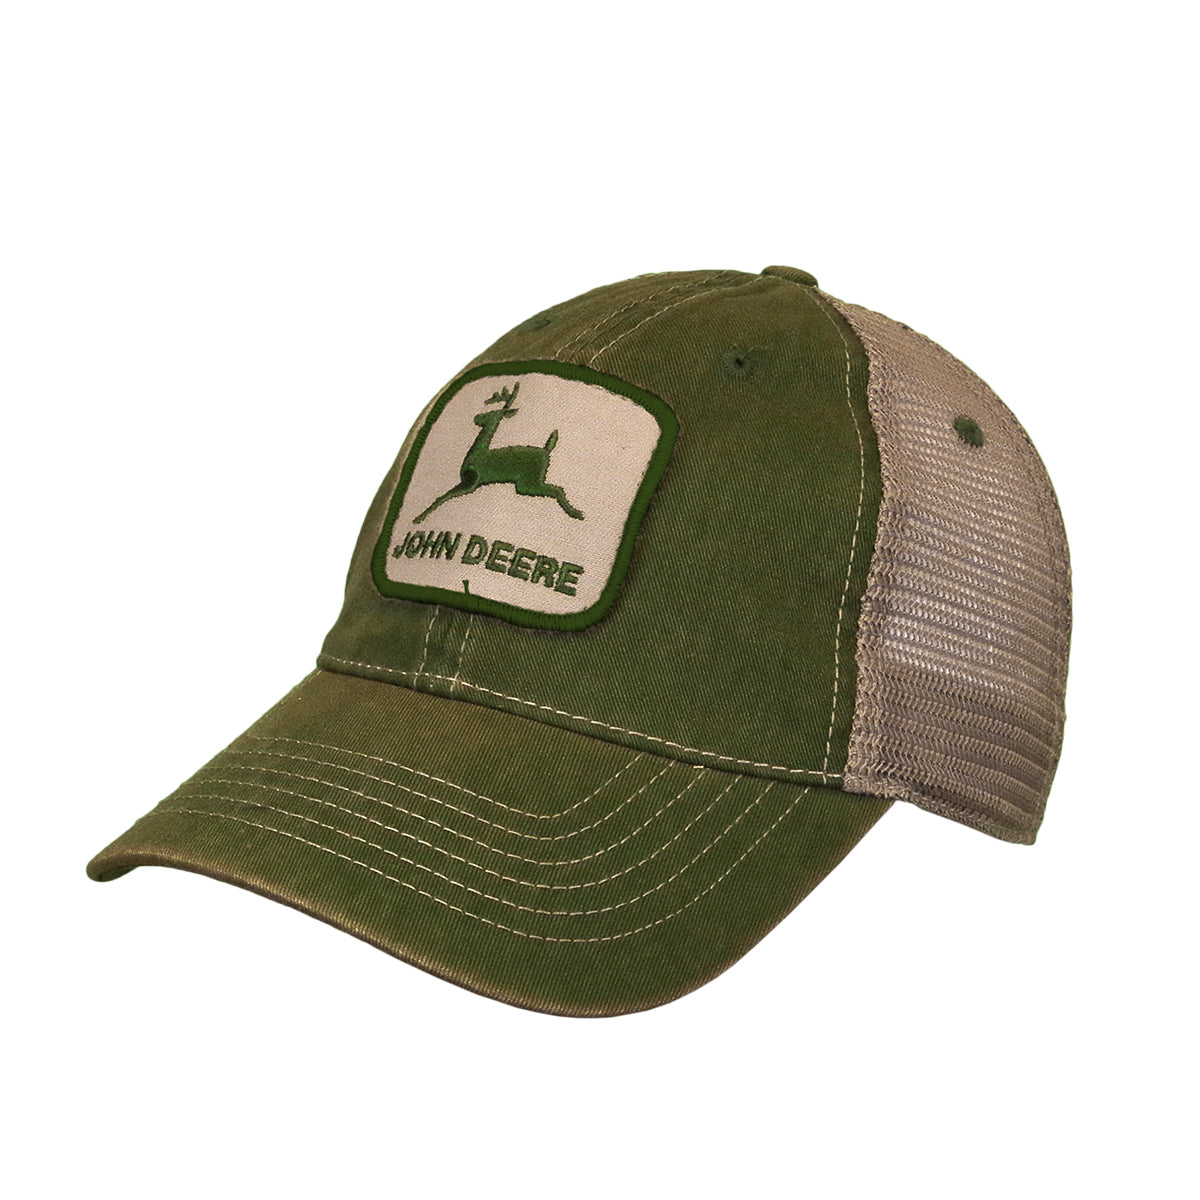 John Deere Green and Ivory Stoned Washed Cap